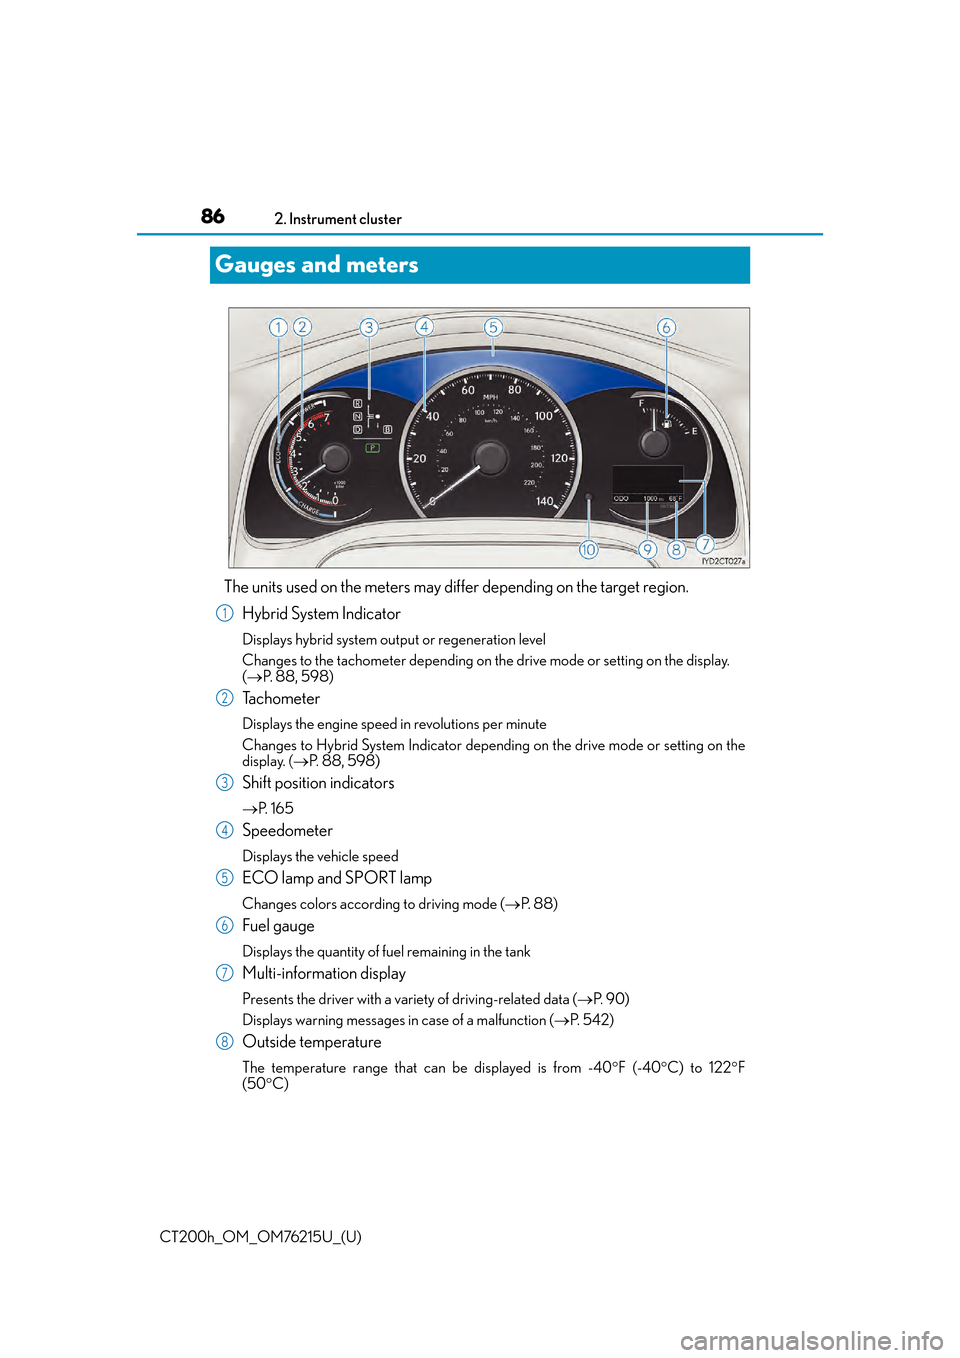 Lexus CT200h 2017   (in English) Owners Guide 86
CT200h_OM_OM76215U_(U)2. Instrument cluster
Gauges and meters
The units used on the meters may diff
er depending on the target region.
Hybrid System Indicator
Displays hybrid system output or regen